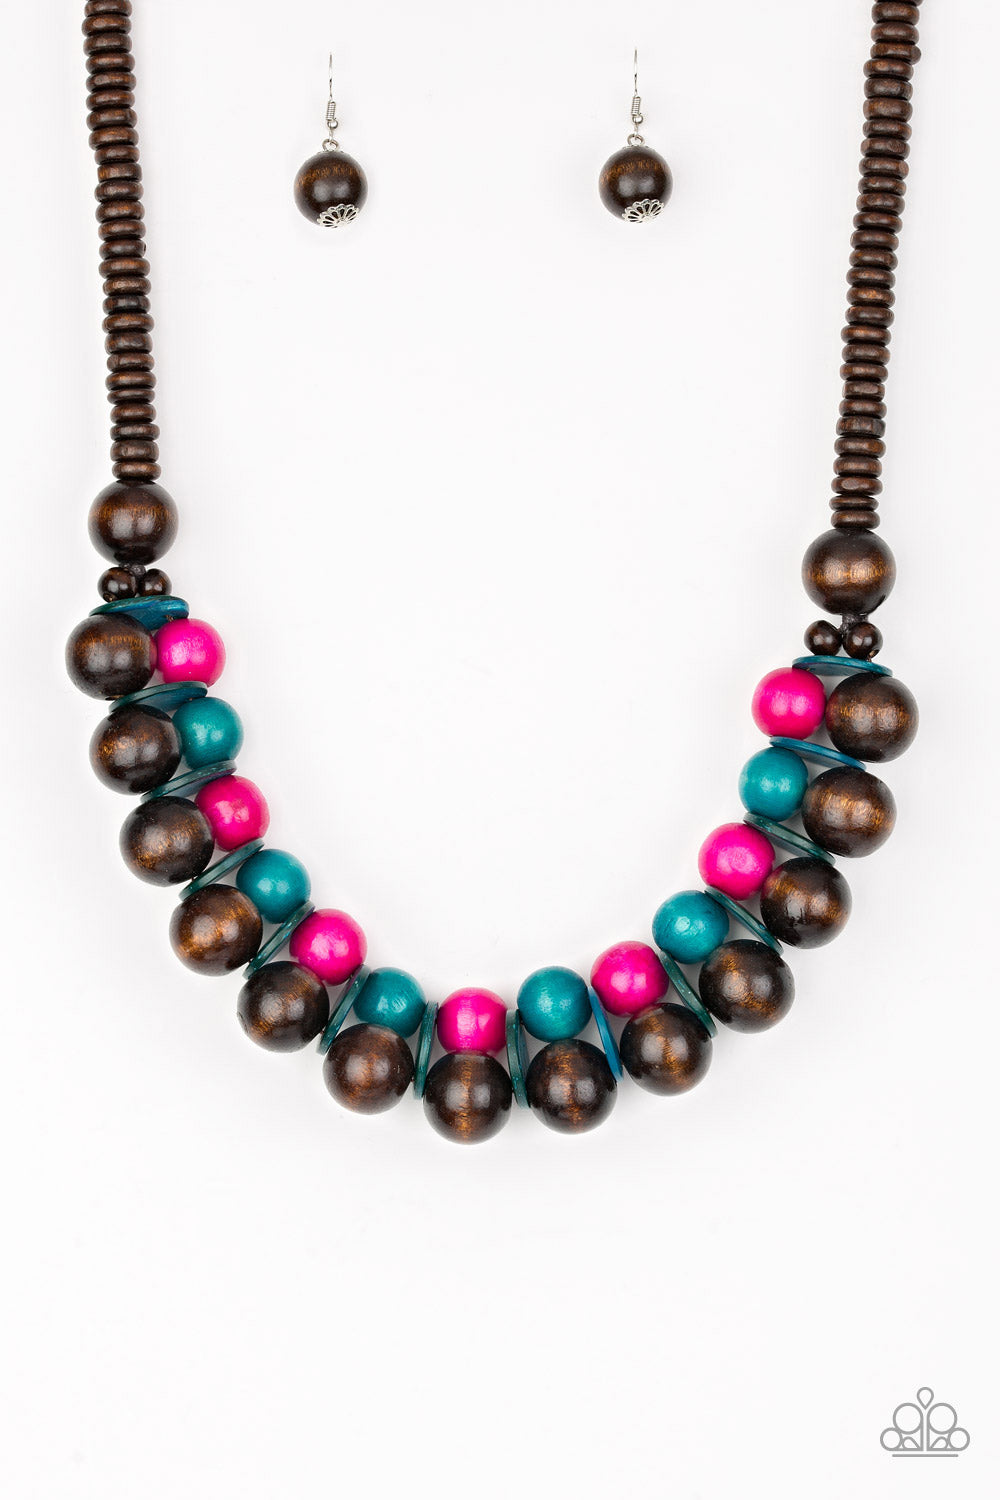 Paparazzi Accessories Caribbean Cover Girl - Multi Wood Necklaces - Lady T Accessories